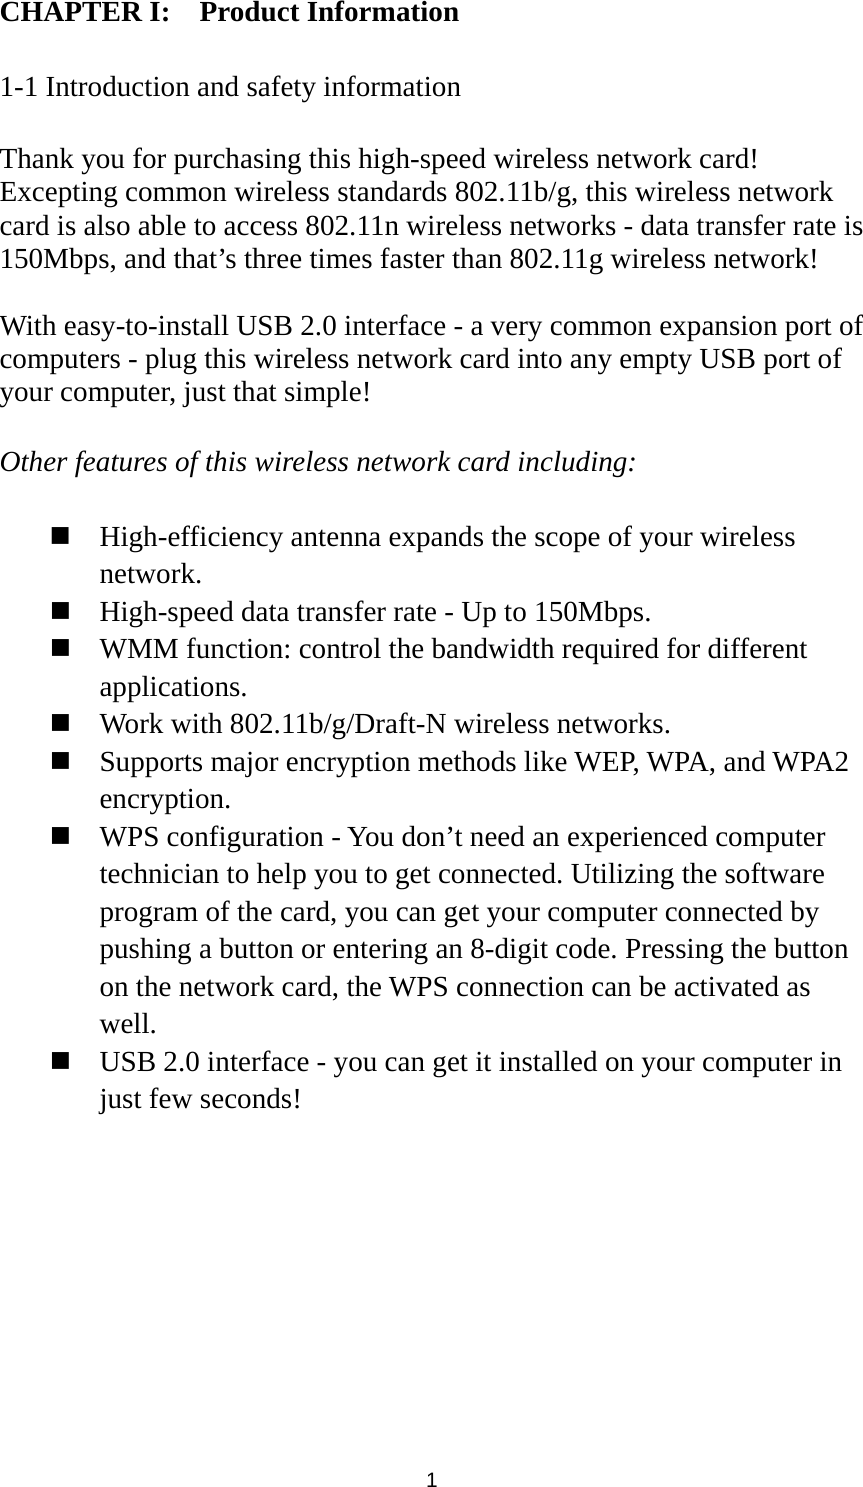  1 CHAPTER I:    Product Information  1-1 Introduction and safety information  Thank you for purchasing this high-speed wireless network card! Excepting common wireless standards 802.11b/g, this wireless network card is also able to access 802.11n wireless networks - data transfer rate is 150Mbps, and that’s three times faster than 802.11g wireless network!    With easy-to-install USB 2.0 interface - a very common expansion port of computers - plug this wireless network card into any empty USB port of your computer, just that simple!  Other features of this wireless network card including:   High-efficiency antenna expands the scope of your wireless network.  High-speed data transfer rate - Up to 150Mbps.  WMM function: control the bandwidth required for different applications.  Work with 802.11b/g/Draft-N wireless networks.  Supports major encryption methods like WEP, WPA, and WPA2 encryption.  WPS configuration - You don’t need an experienced computer technician to help you to get connected. Utilizing the software program of the card, you can get your computer connected by pushing a button or entering an 8-digit code. Pressing the button on the network card, the WPS connection can be activated as well.  USB 2.0 interface - you can get it installed on your computer in just few seconds! 